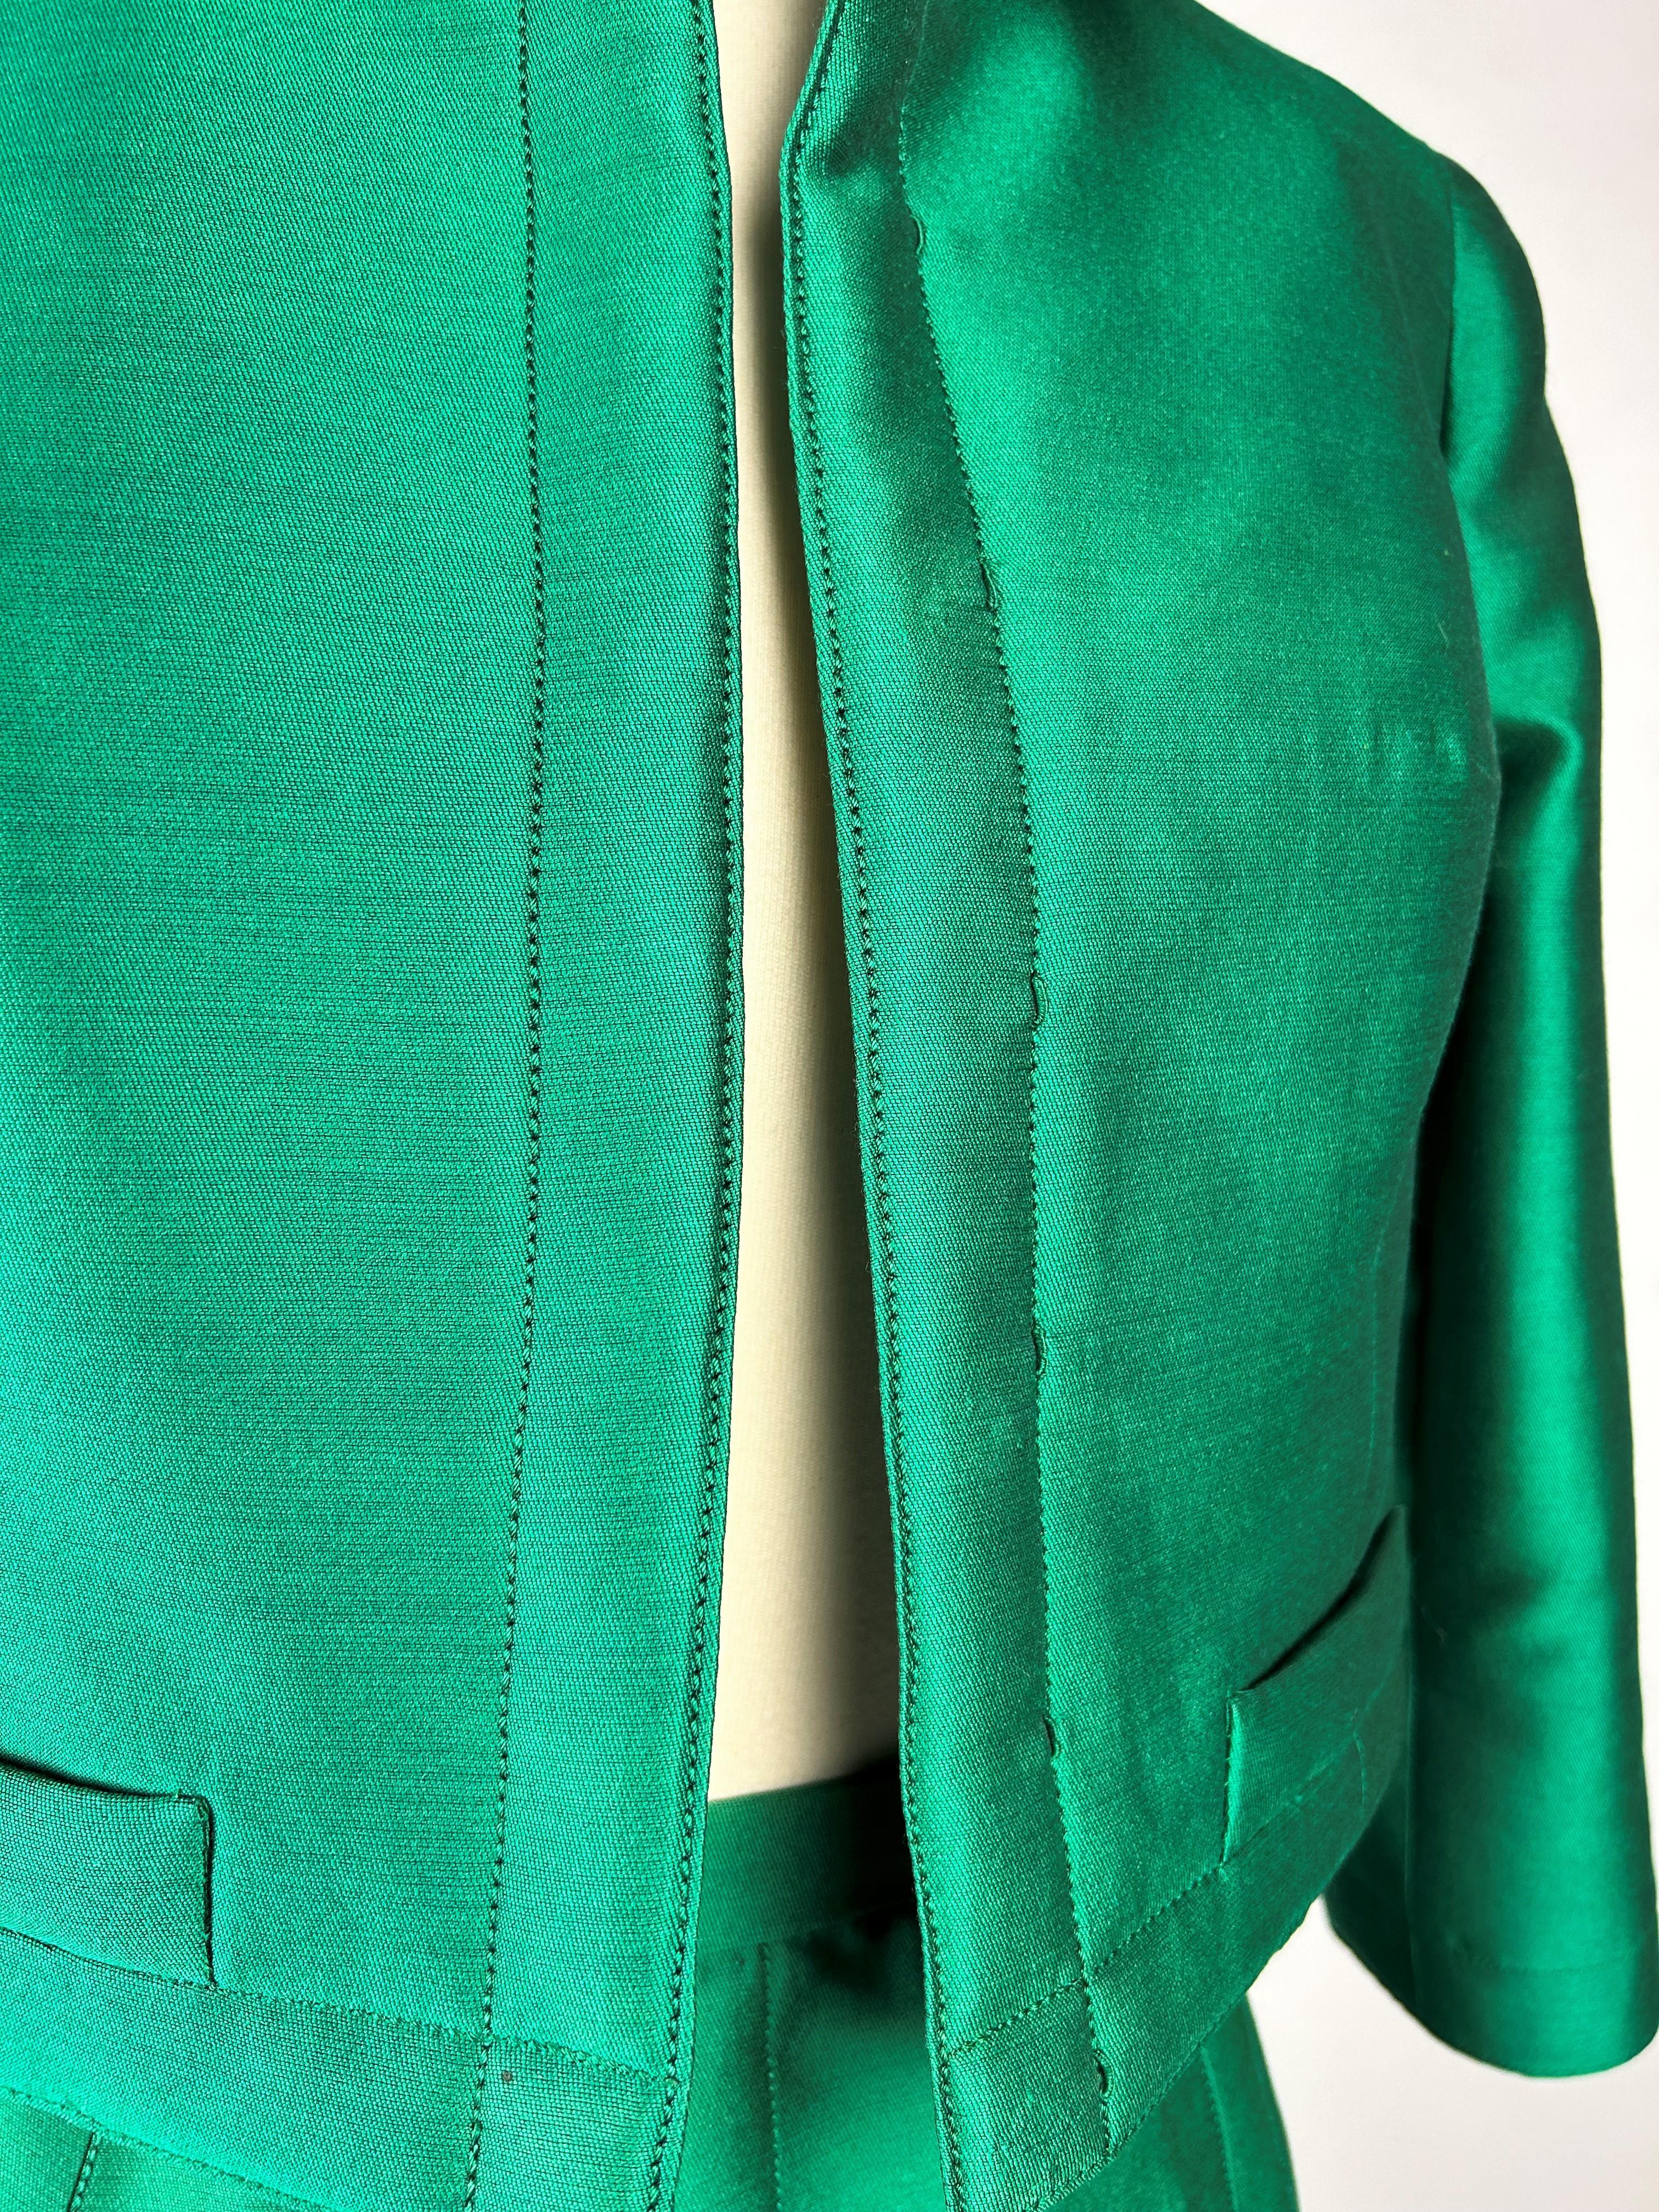 An Emerald Gazar Demi-Couture Skirt Suit by Louis Féraud Circa 1968-1972 For Sale 14